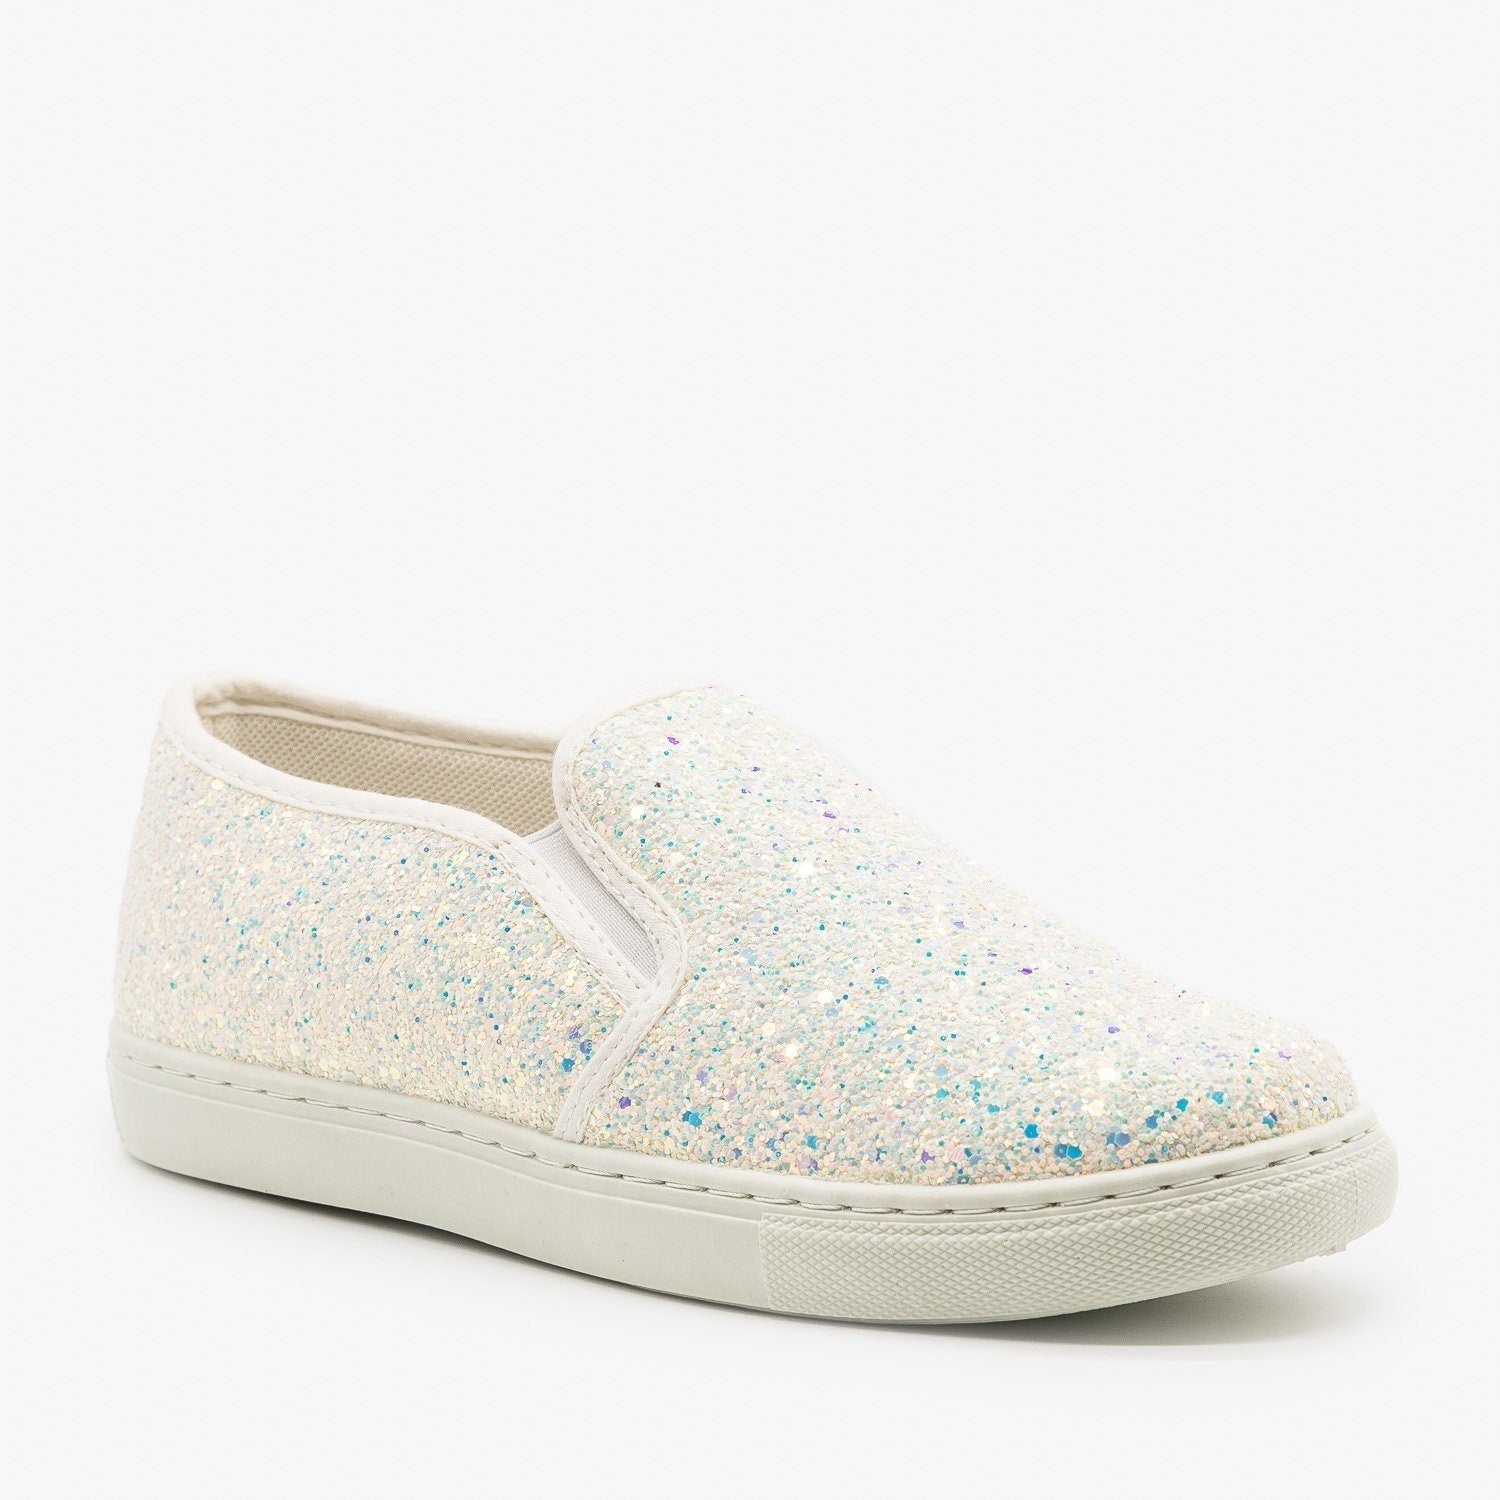 white shoes with glitter